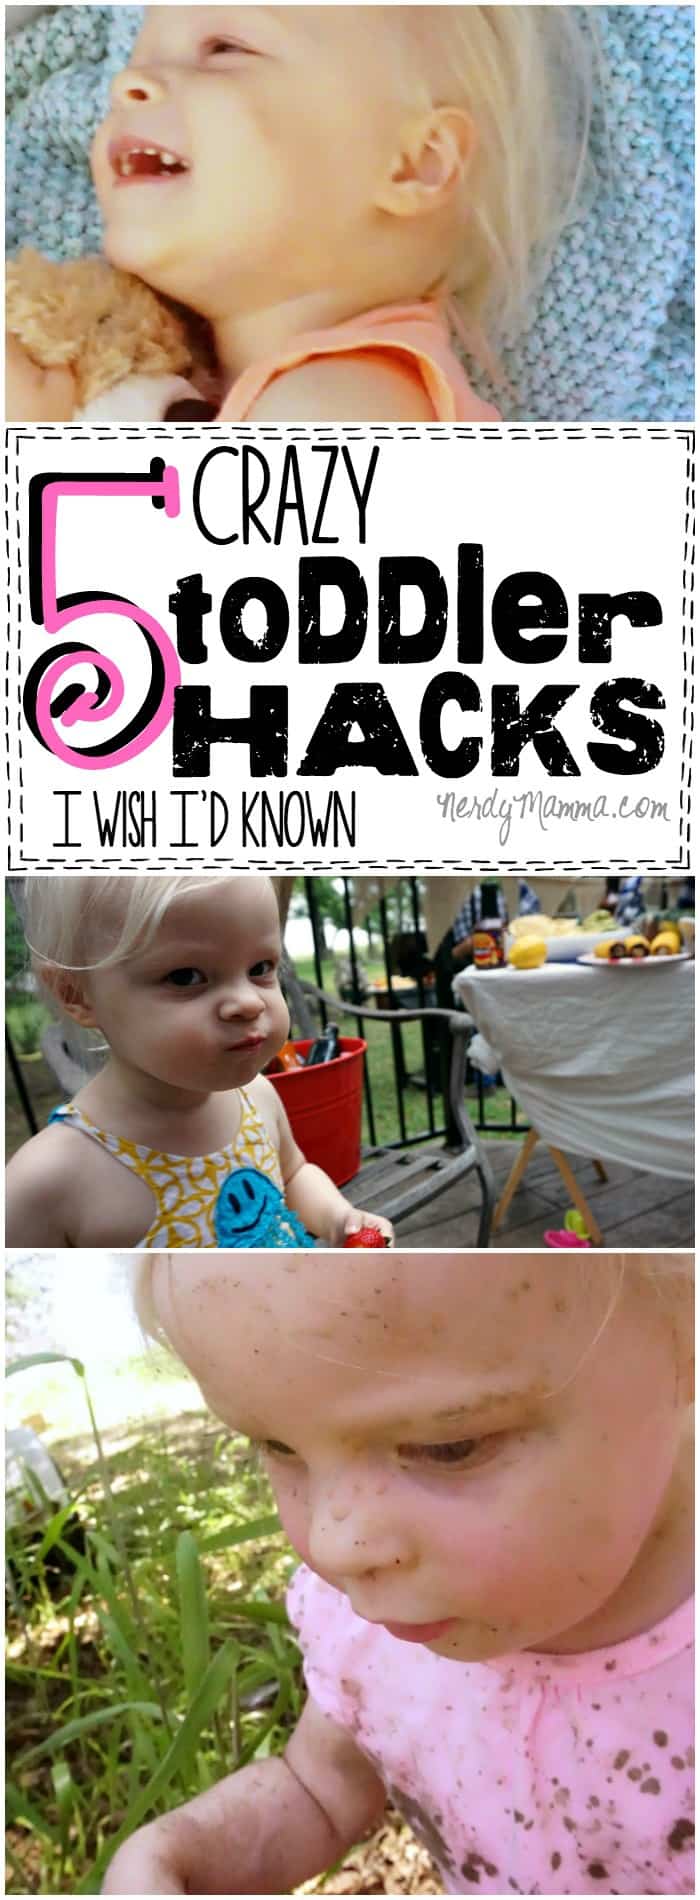 These 5 crazy toddler hacks--genius. I mean, I wish I'd known them...and I'm only ABOUT to have a toddler! LOL!